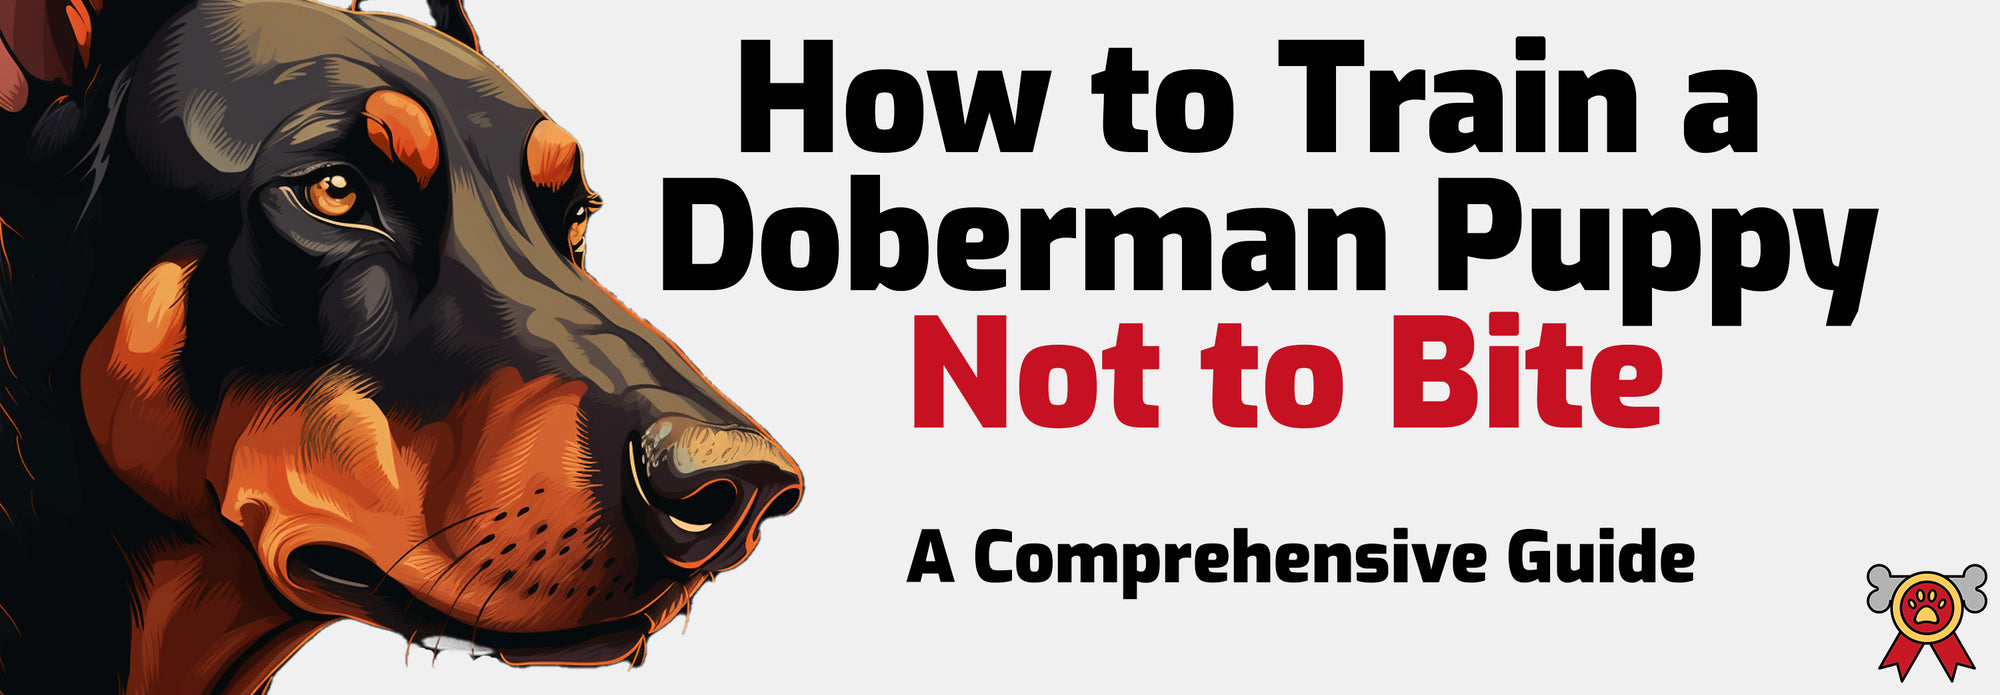 How to Train a Doberman Puppy Not to Bite